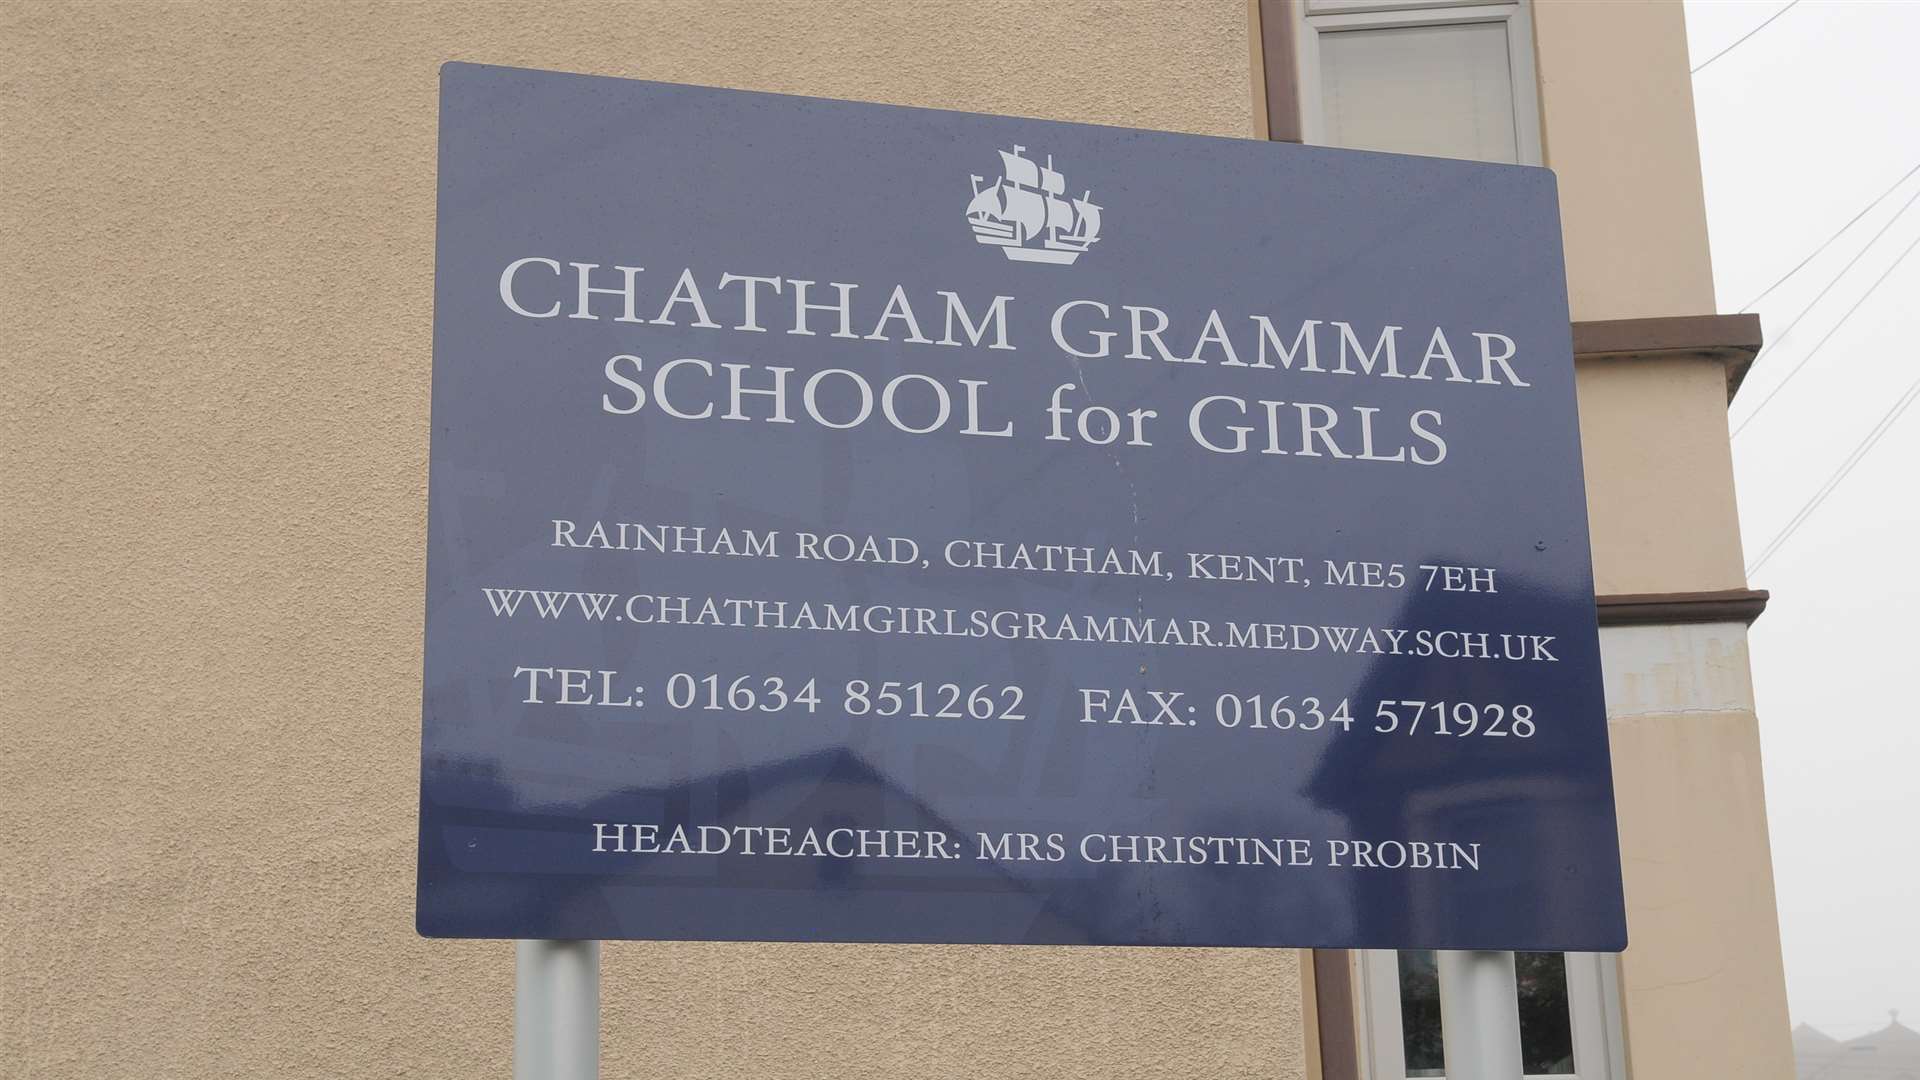 The protest happened at Chatham Grammar School for Girls